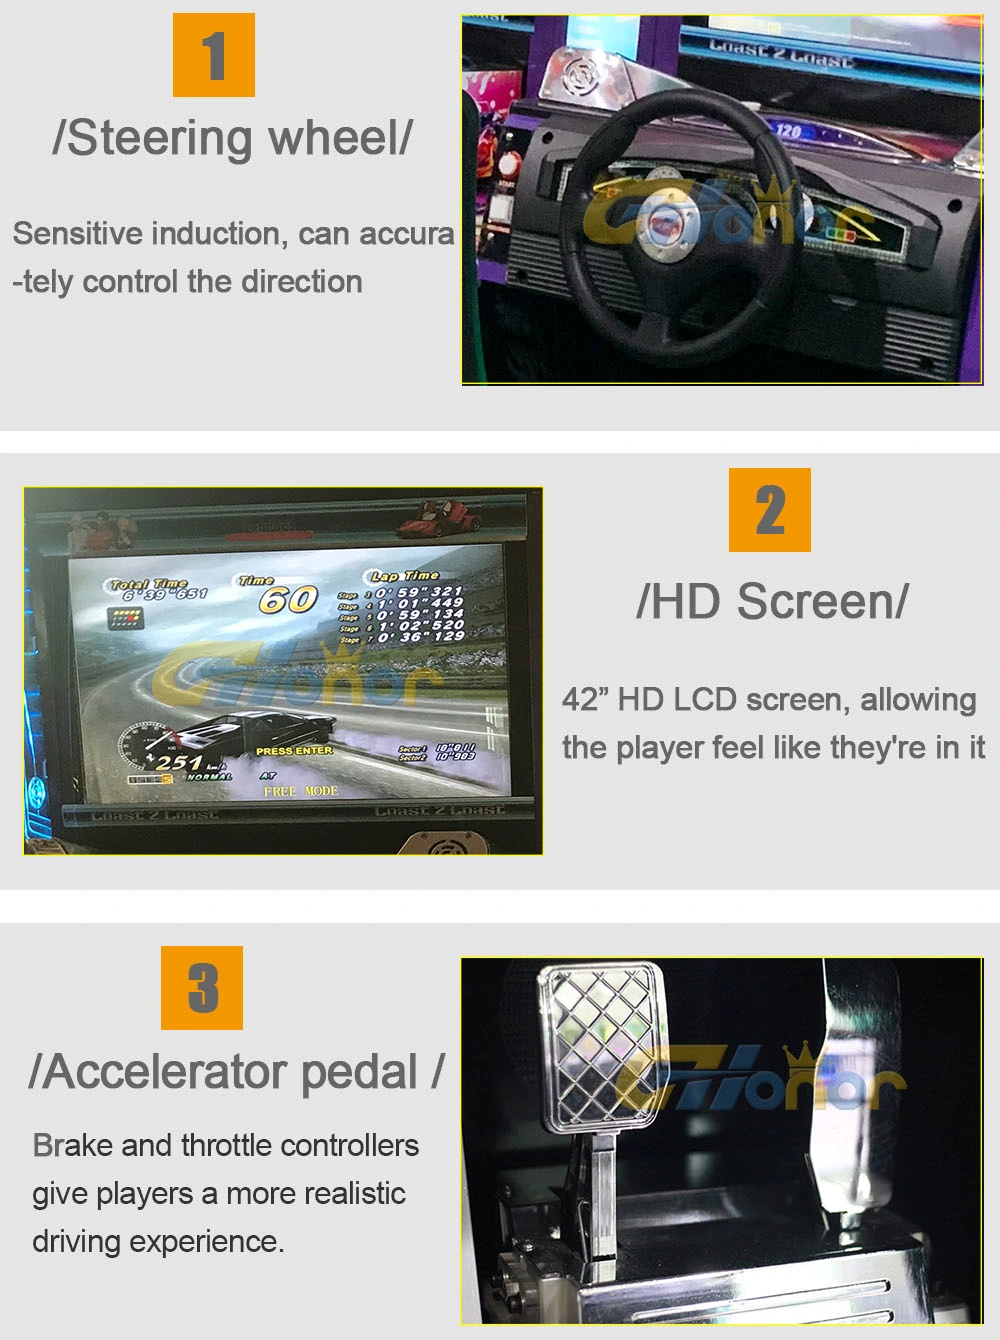 Newest Simulator 3D Driving Car 2 Players Arcade Car Driving Game Machine Coin Operated Racing Car Game Machine Arcade Simulator Racing Video Game Machine